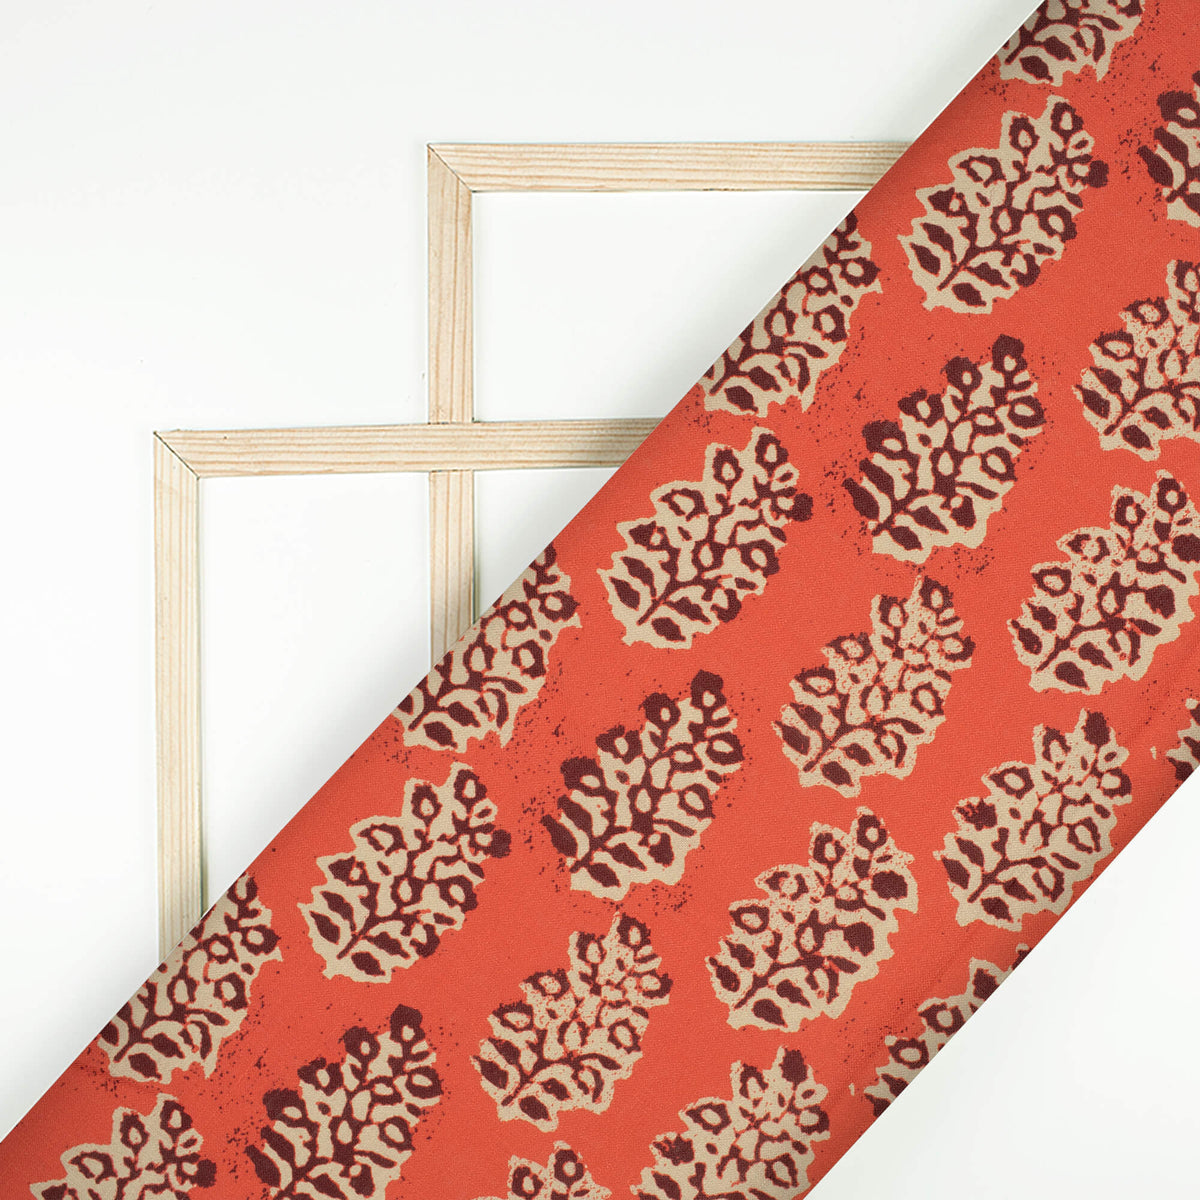 Vermilion Red And Seal Brown Leaf Pattern Digital Print Linen Textured Fabric (Width 56 Inches)